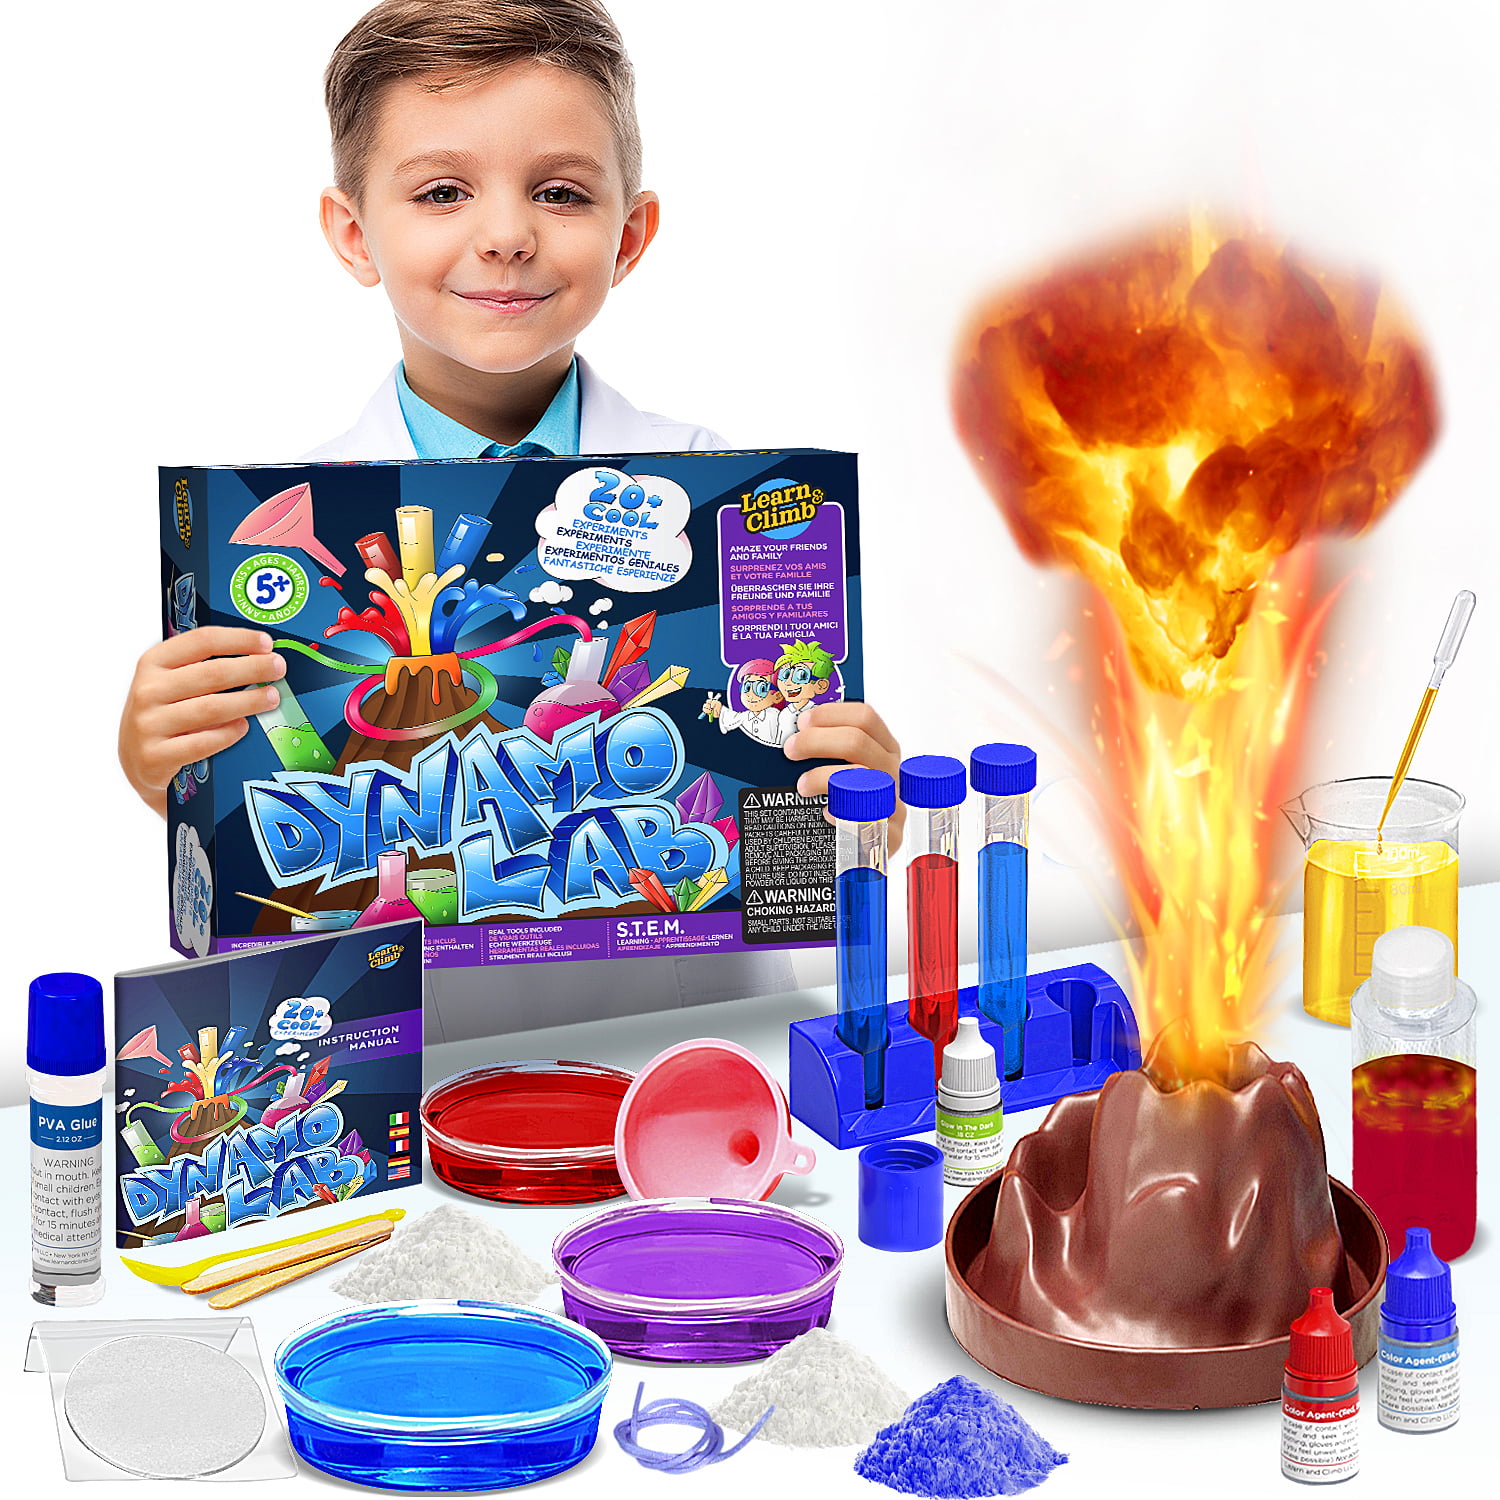 Scientist Name tag! Learn & Climb Science Kit for Kids Set Includes Over 65 Science Experiments